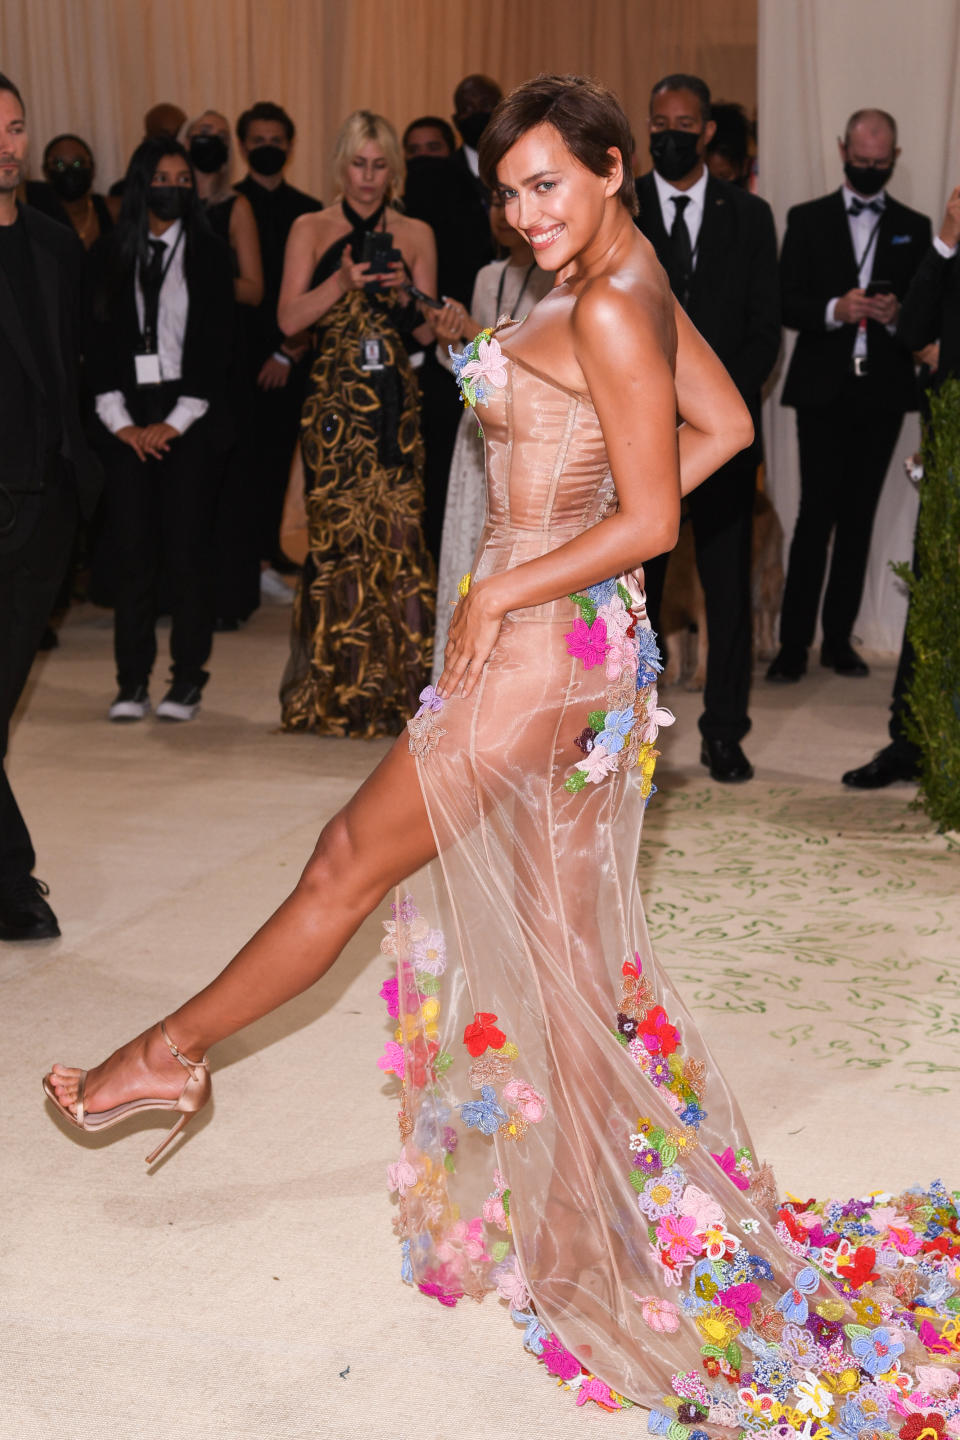 Irina Shayk walking on the red carpet at the 2021 Metropolitan Museum of Art Costume Institute Gala celebrating the opening of the exhibition titled In America: A Lexicon of Fashion held at the Metropolitan Museum of Art in New York, NY on September 13, 2021. (Photo by Anthony Behar/Sipa USA)